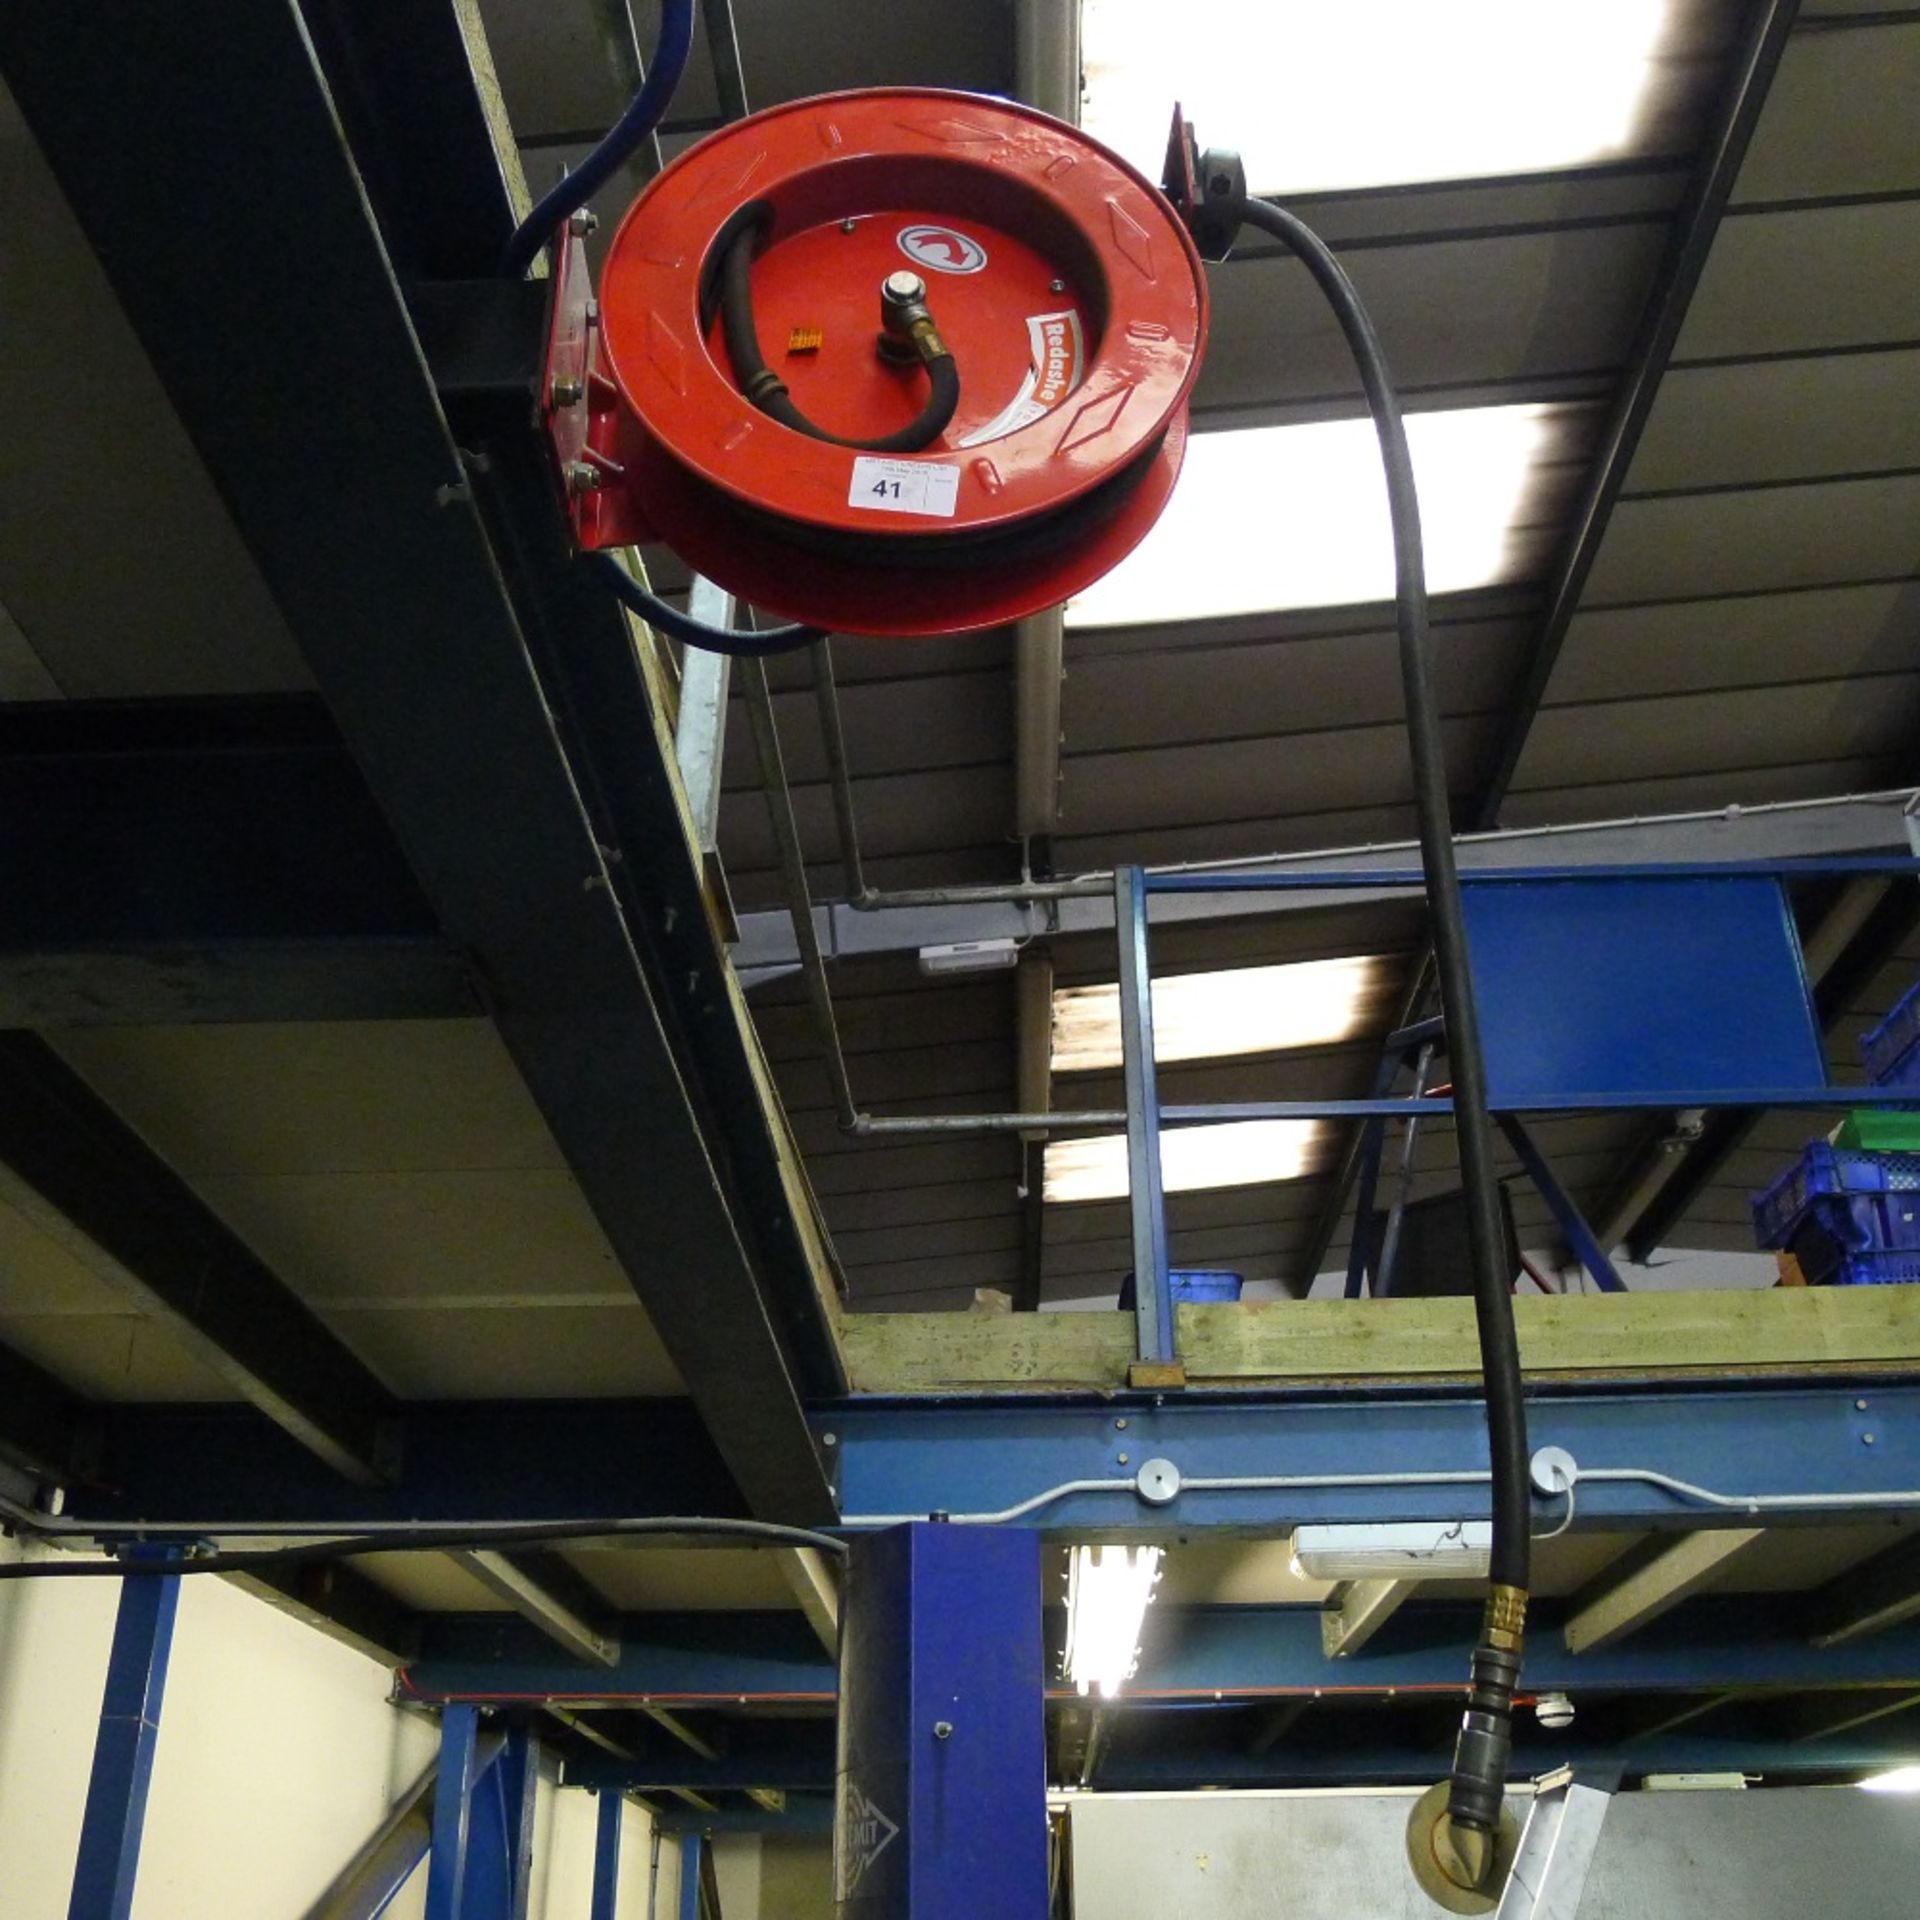 1 wall mounted retractable air hose on metal reel by Redashe